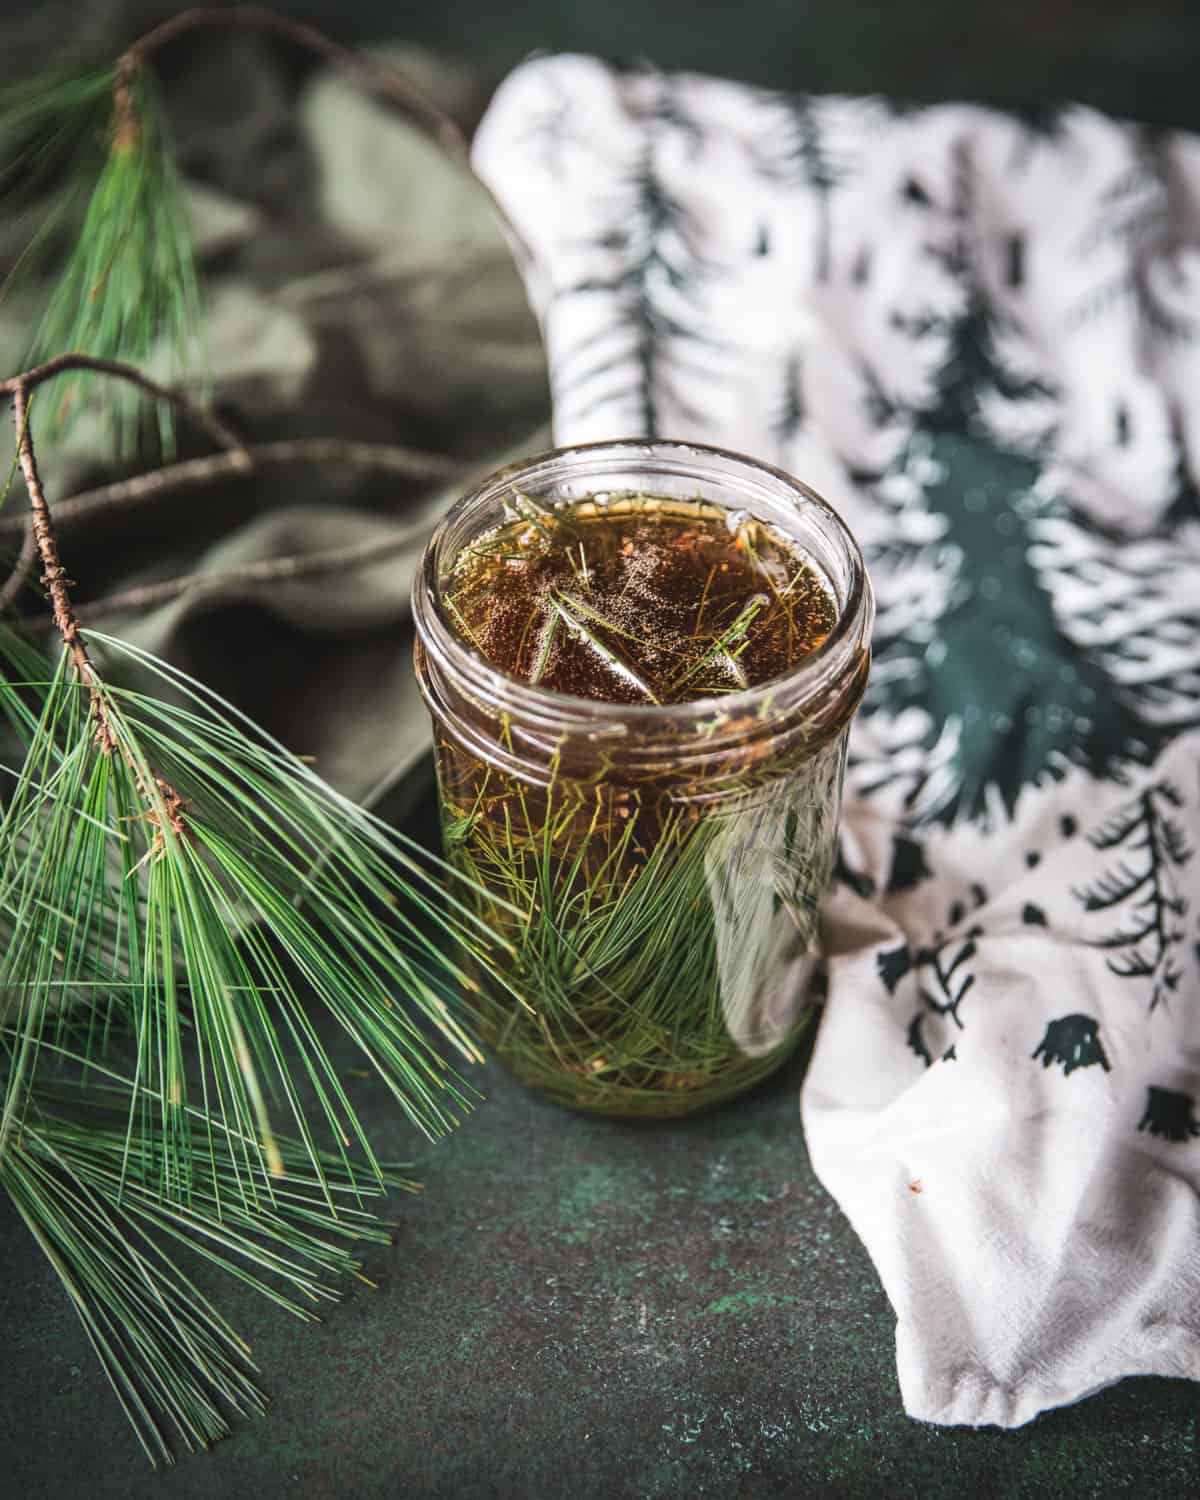 A jar with honey and pine needles, surrounded by fresh pine needles and a tea towel with a green evergreen tree print.